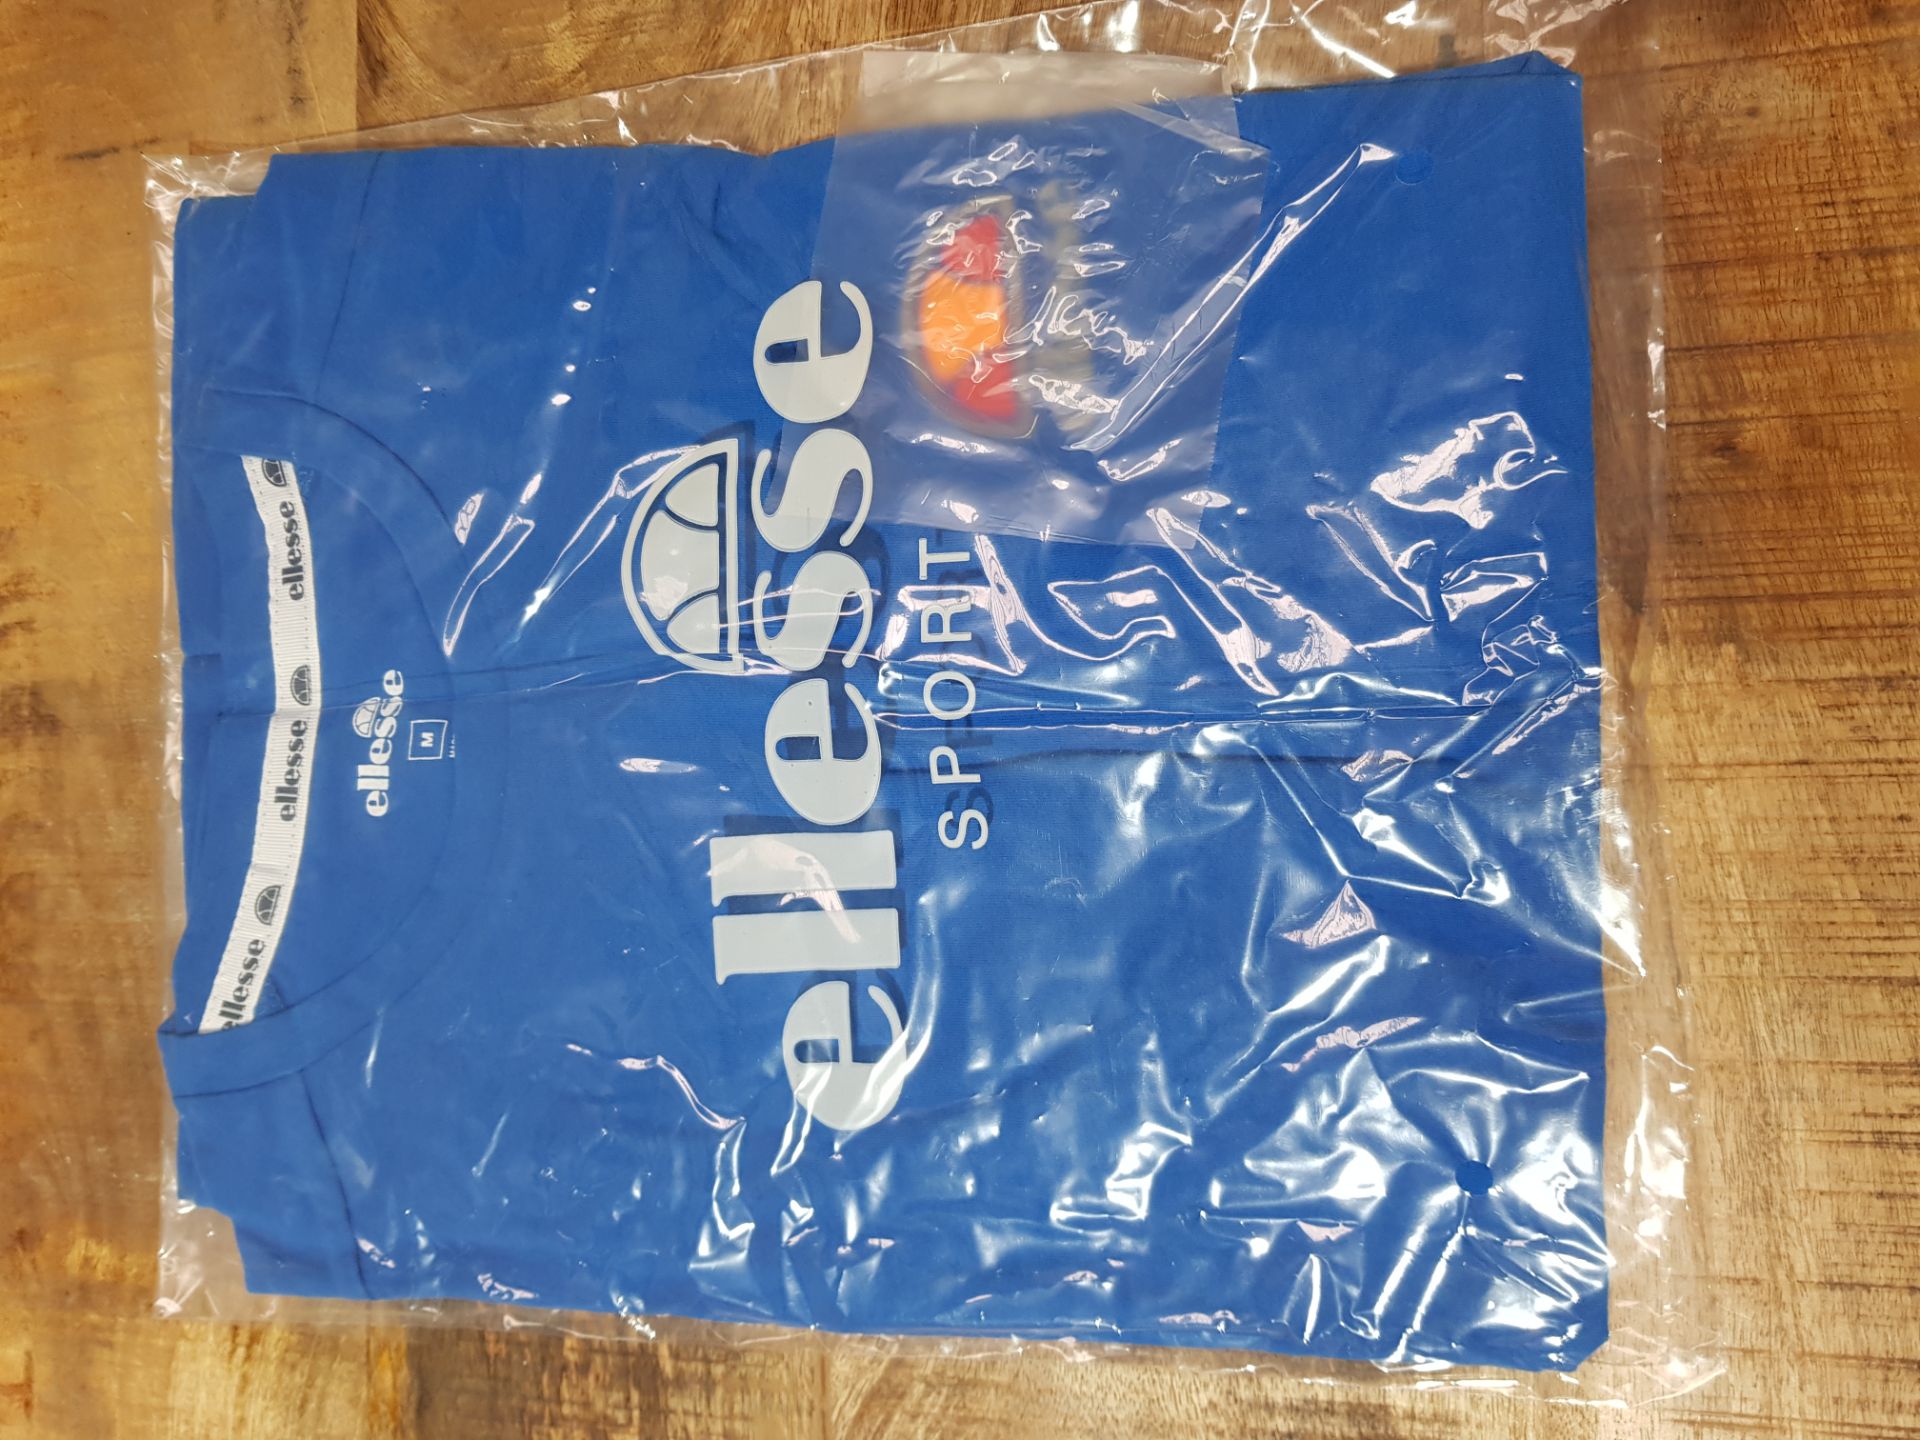 BRAND NEW ELLESSE SPORT T-SHIRT SIZE MEDIUMCondition ReportAppraisal Available on Request- All Items